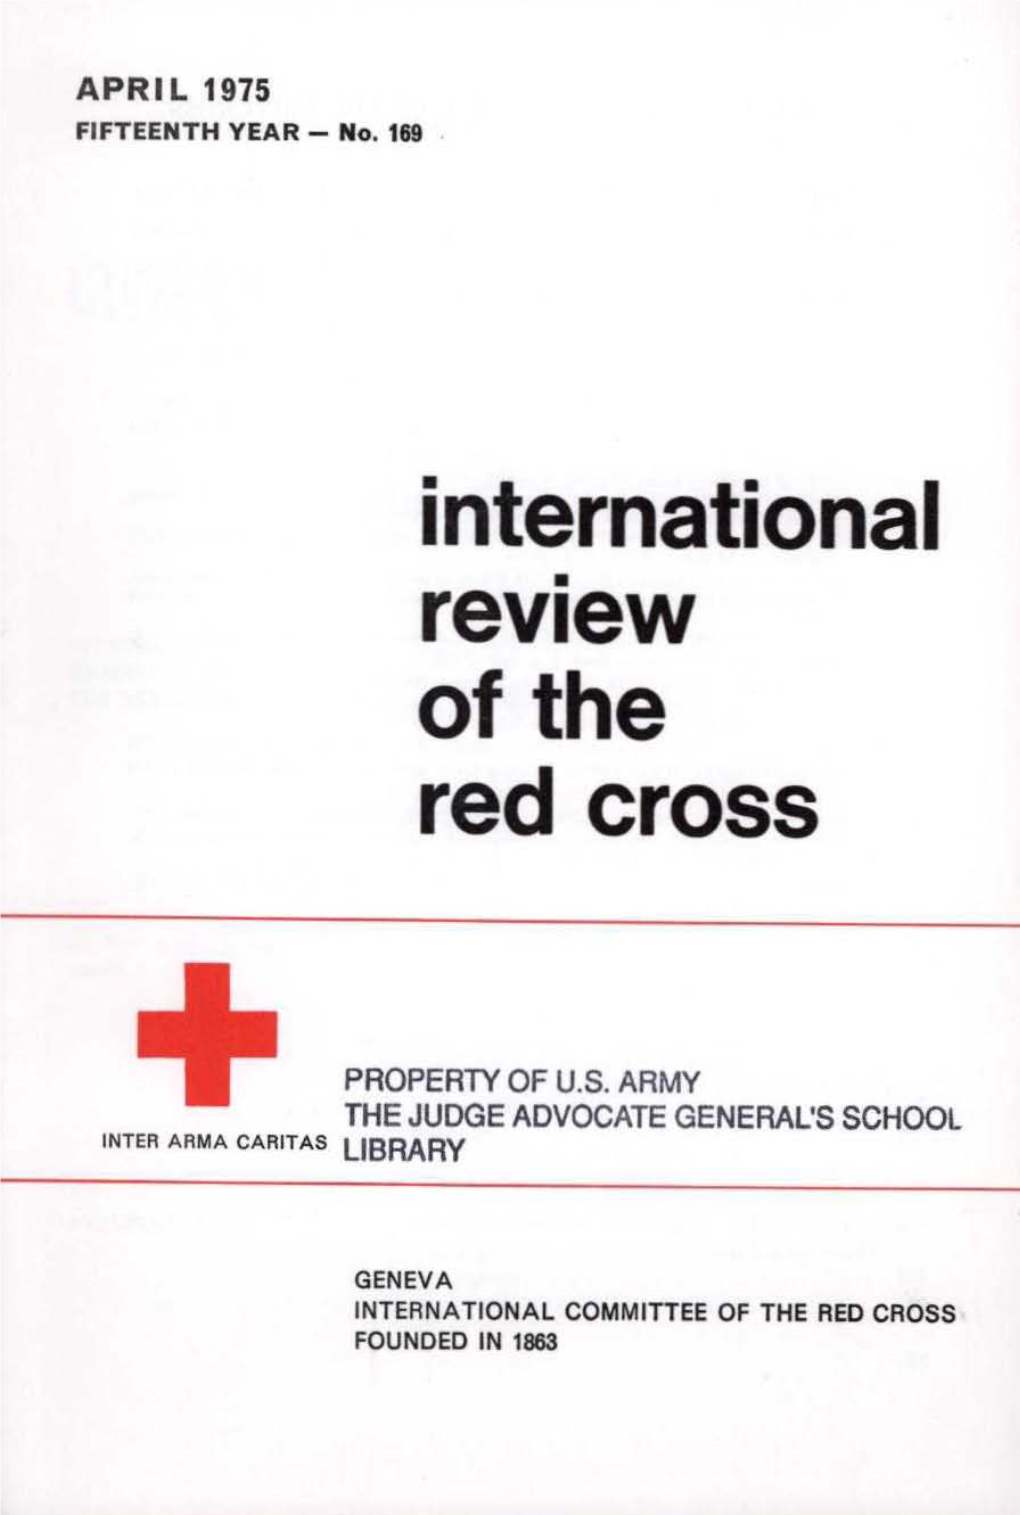 International Review of the Red Cross, April 1975, Fifteenth Year